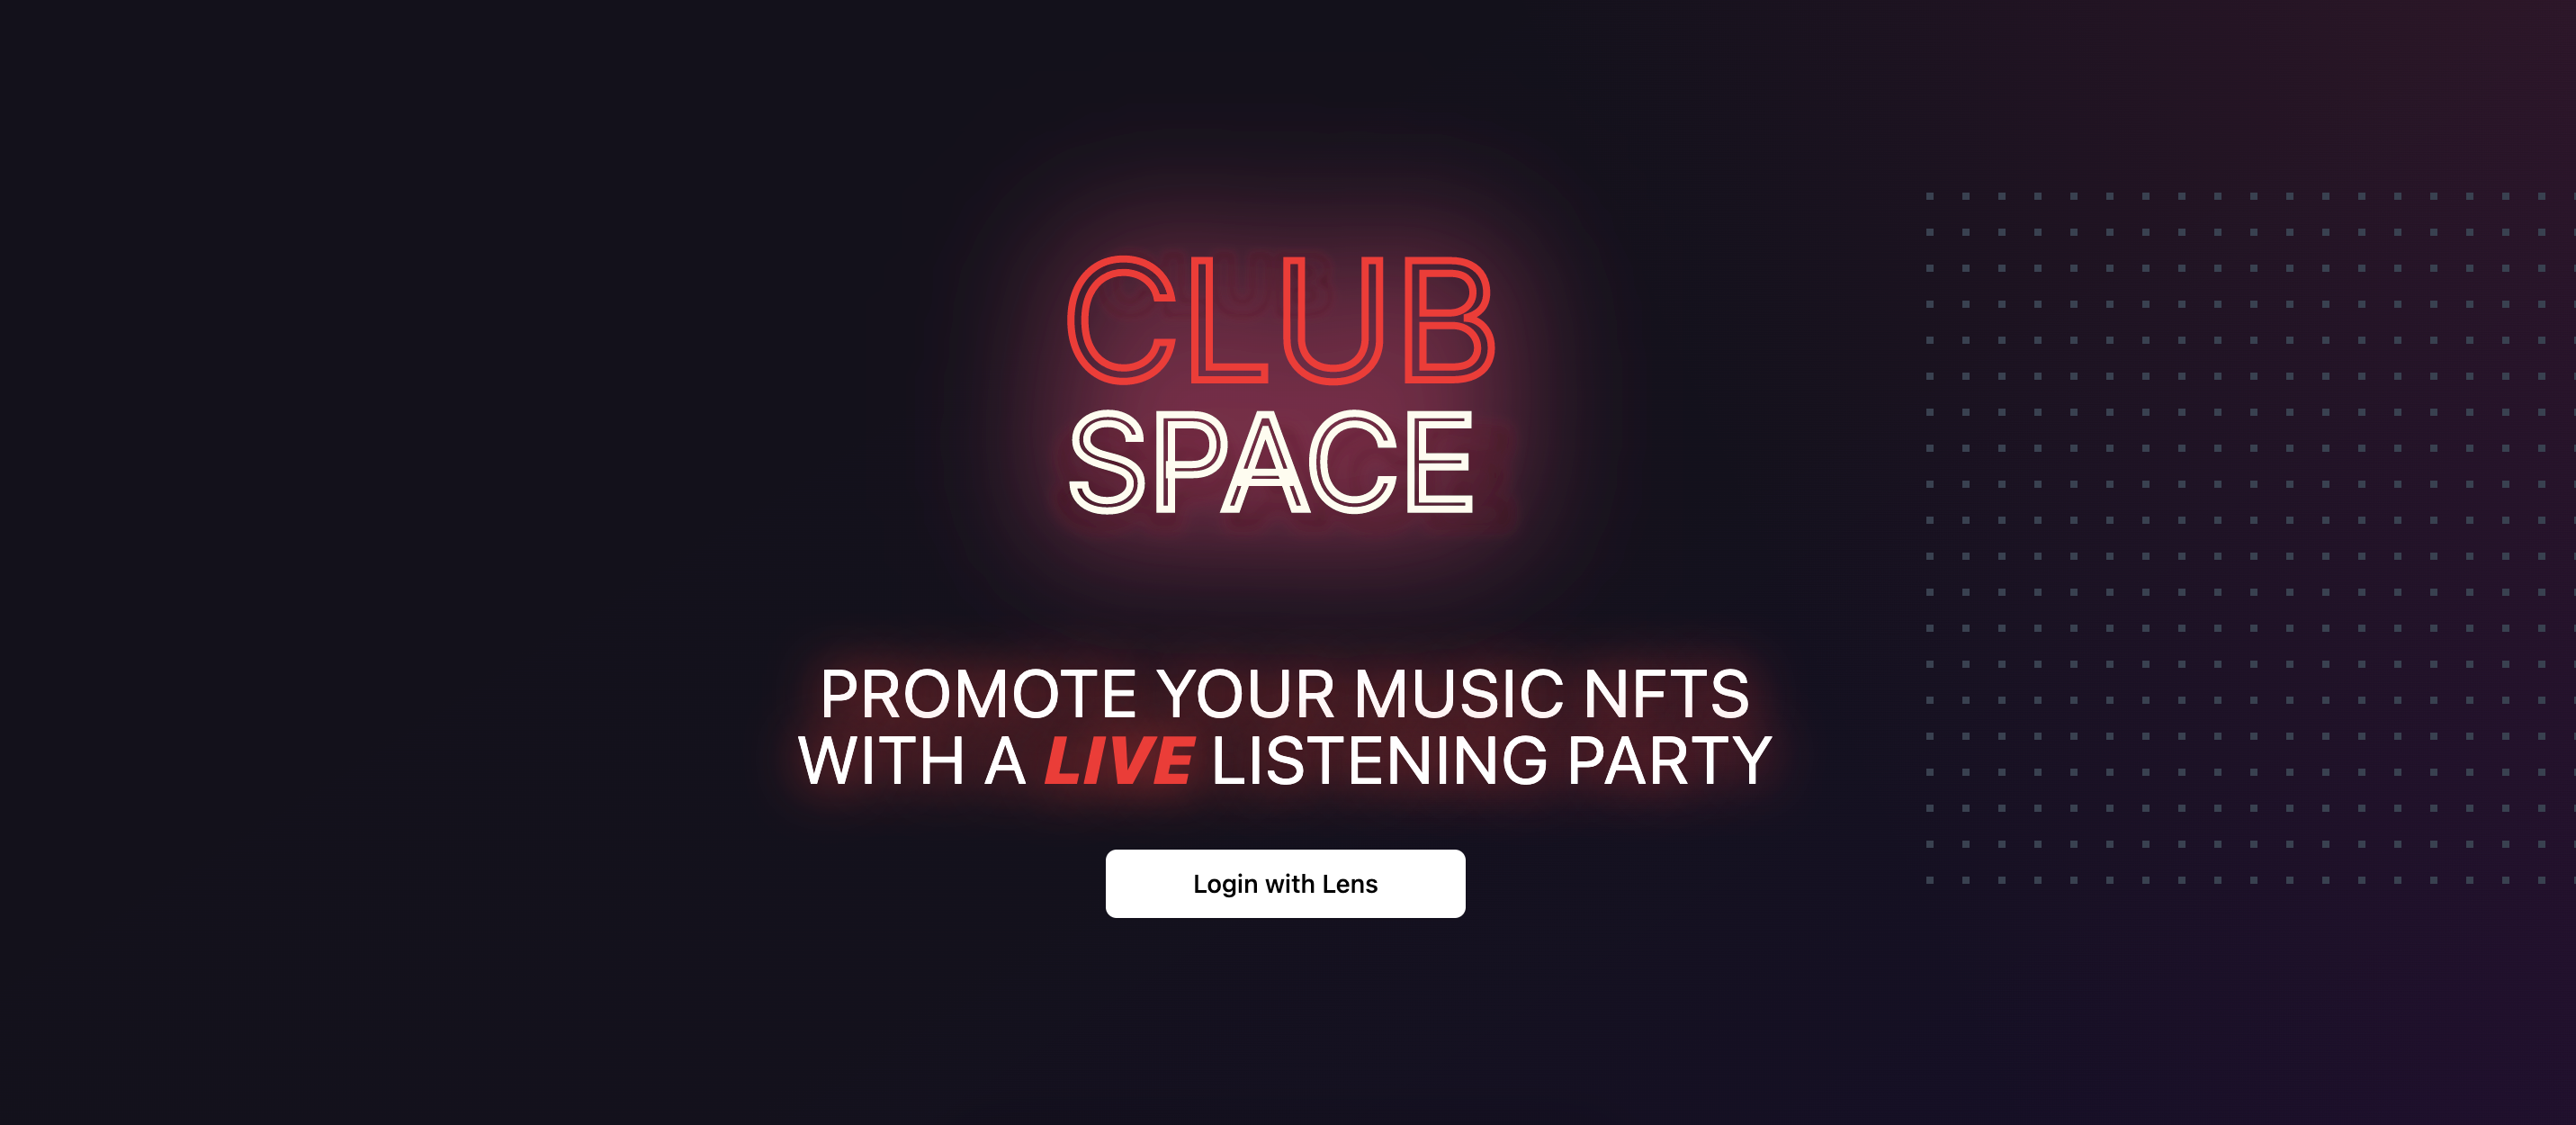 Promote your music NFTs with a live listening party